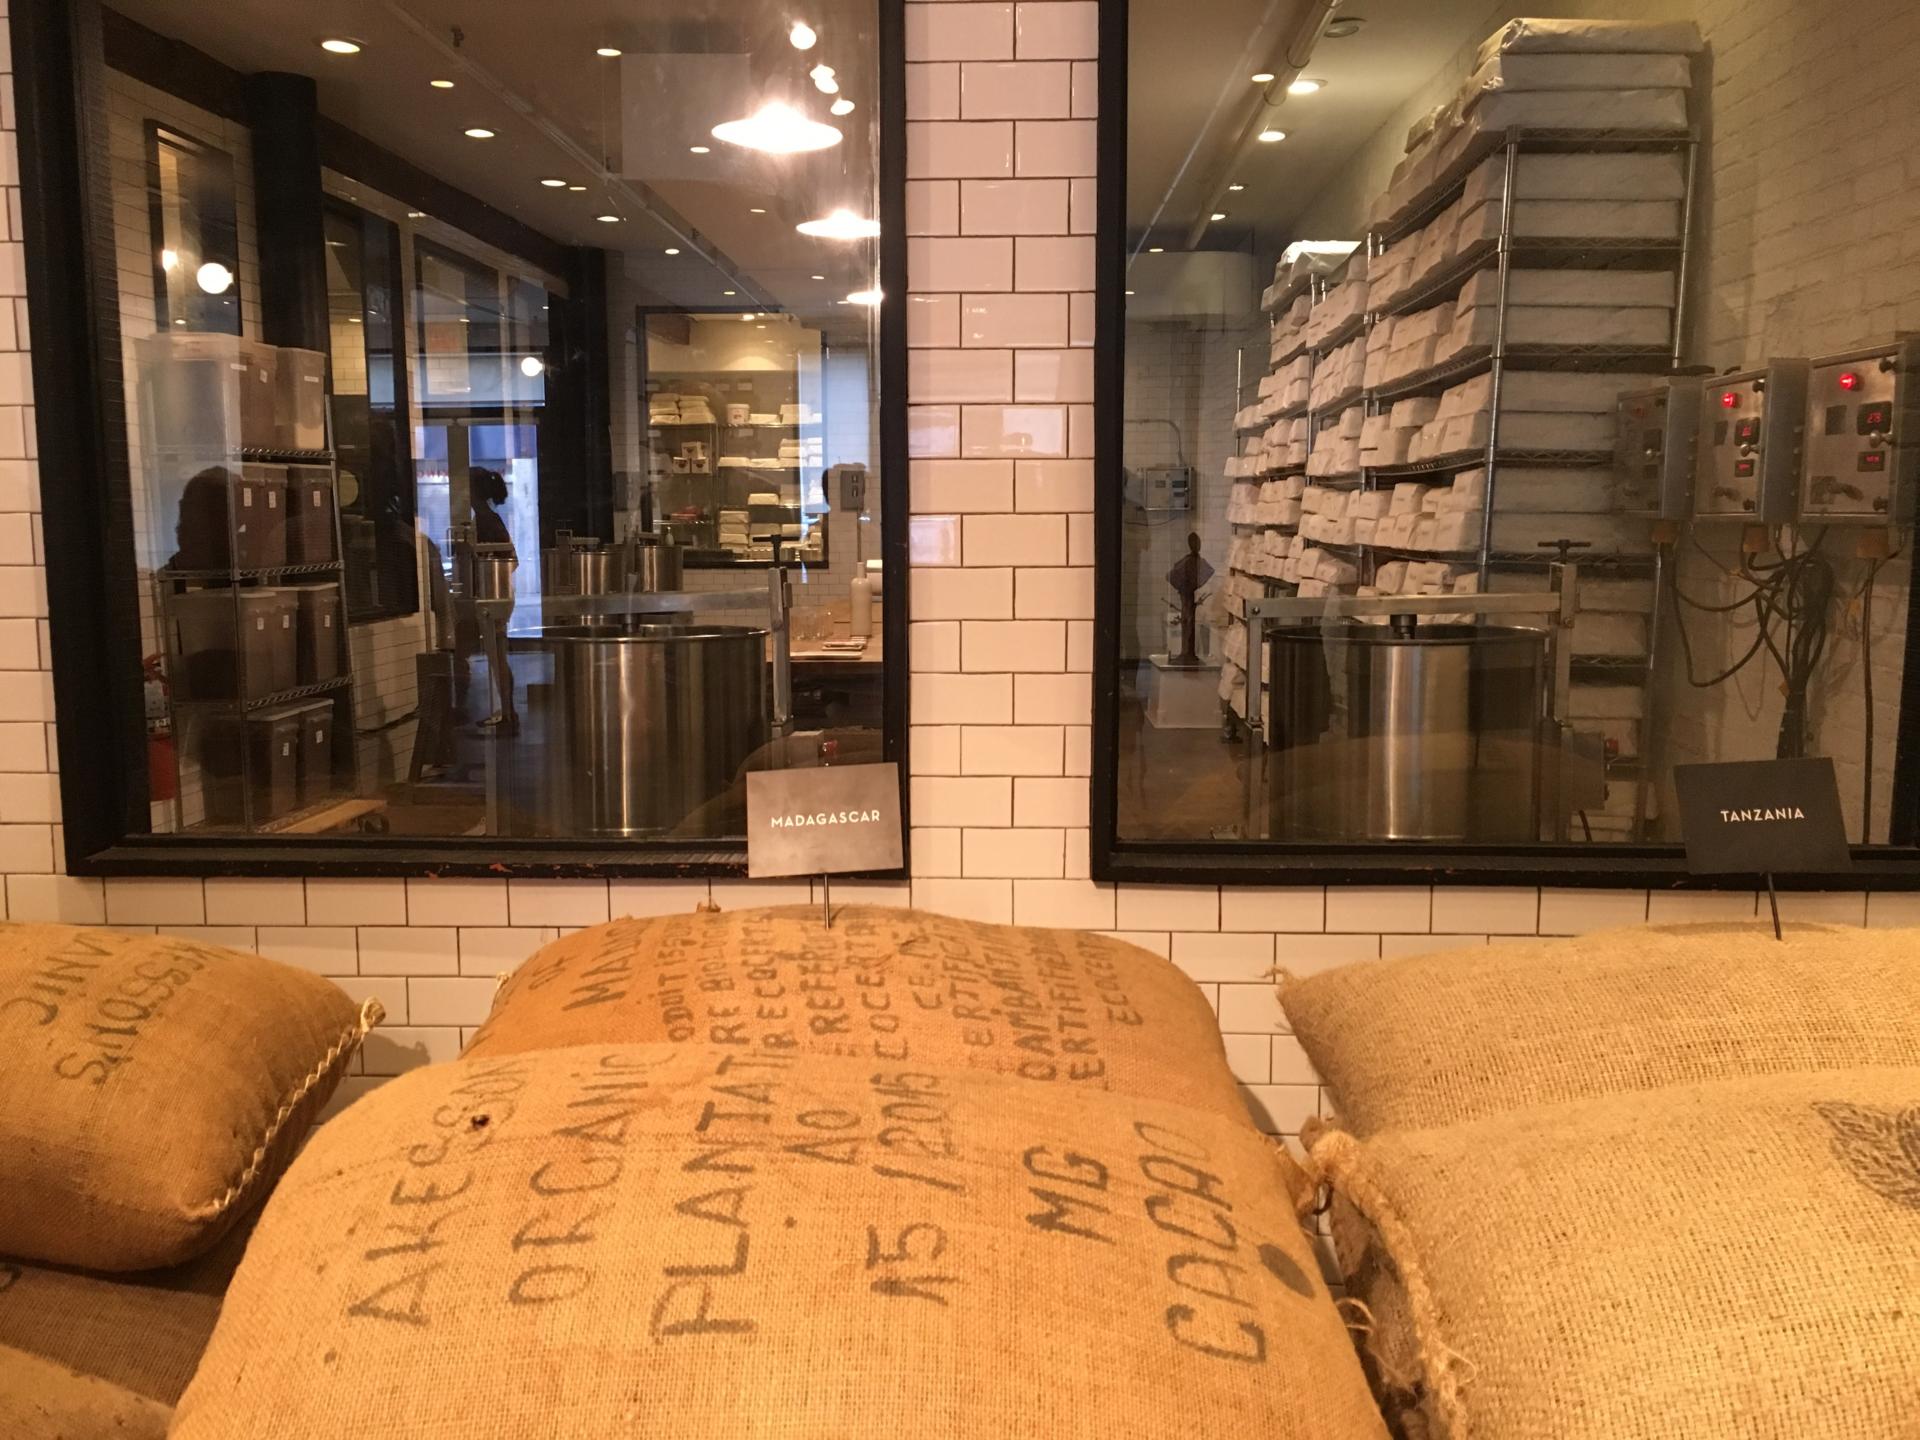 LOCAL: A Mast Brothers Chocolate Shop Grows In Brooklyn